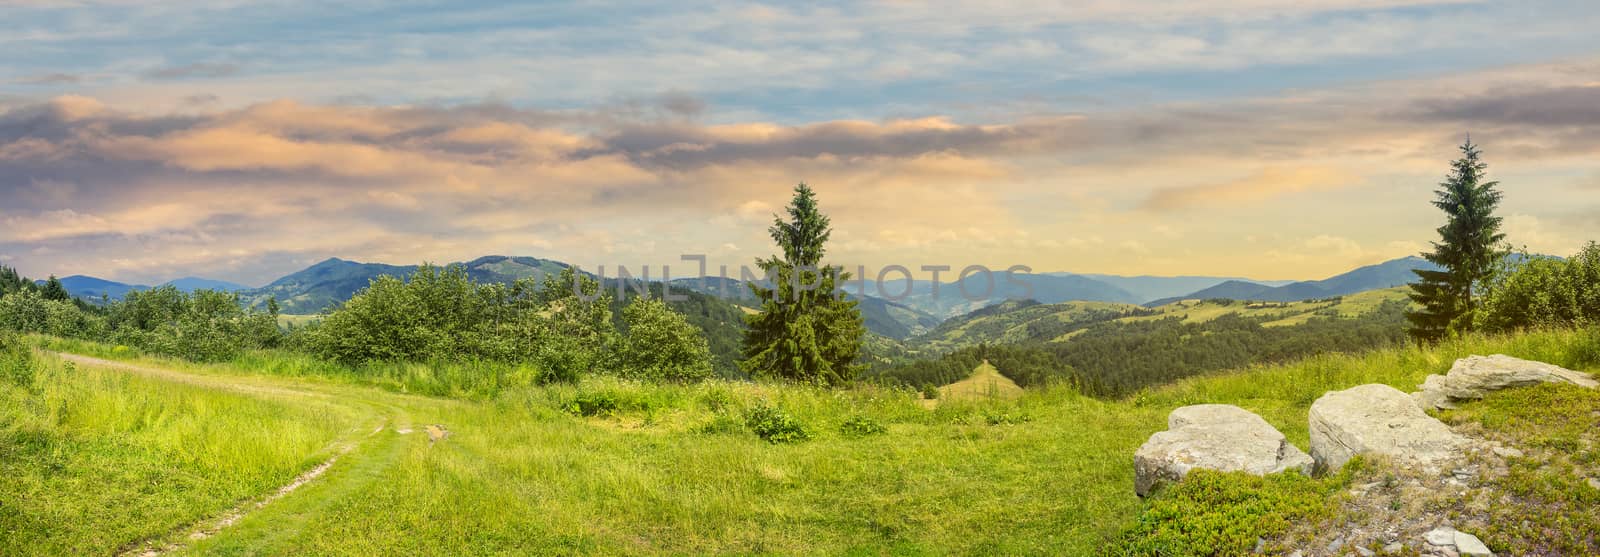 pnoramic collage  landscape. boulders on the meadow with path on the hillside and two pine trees on top of mountain range at sunrise